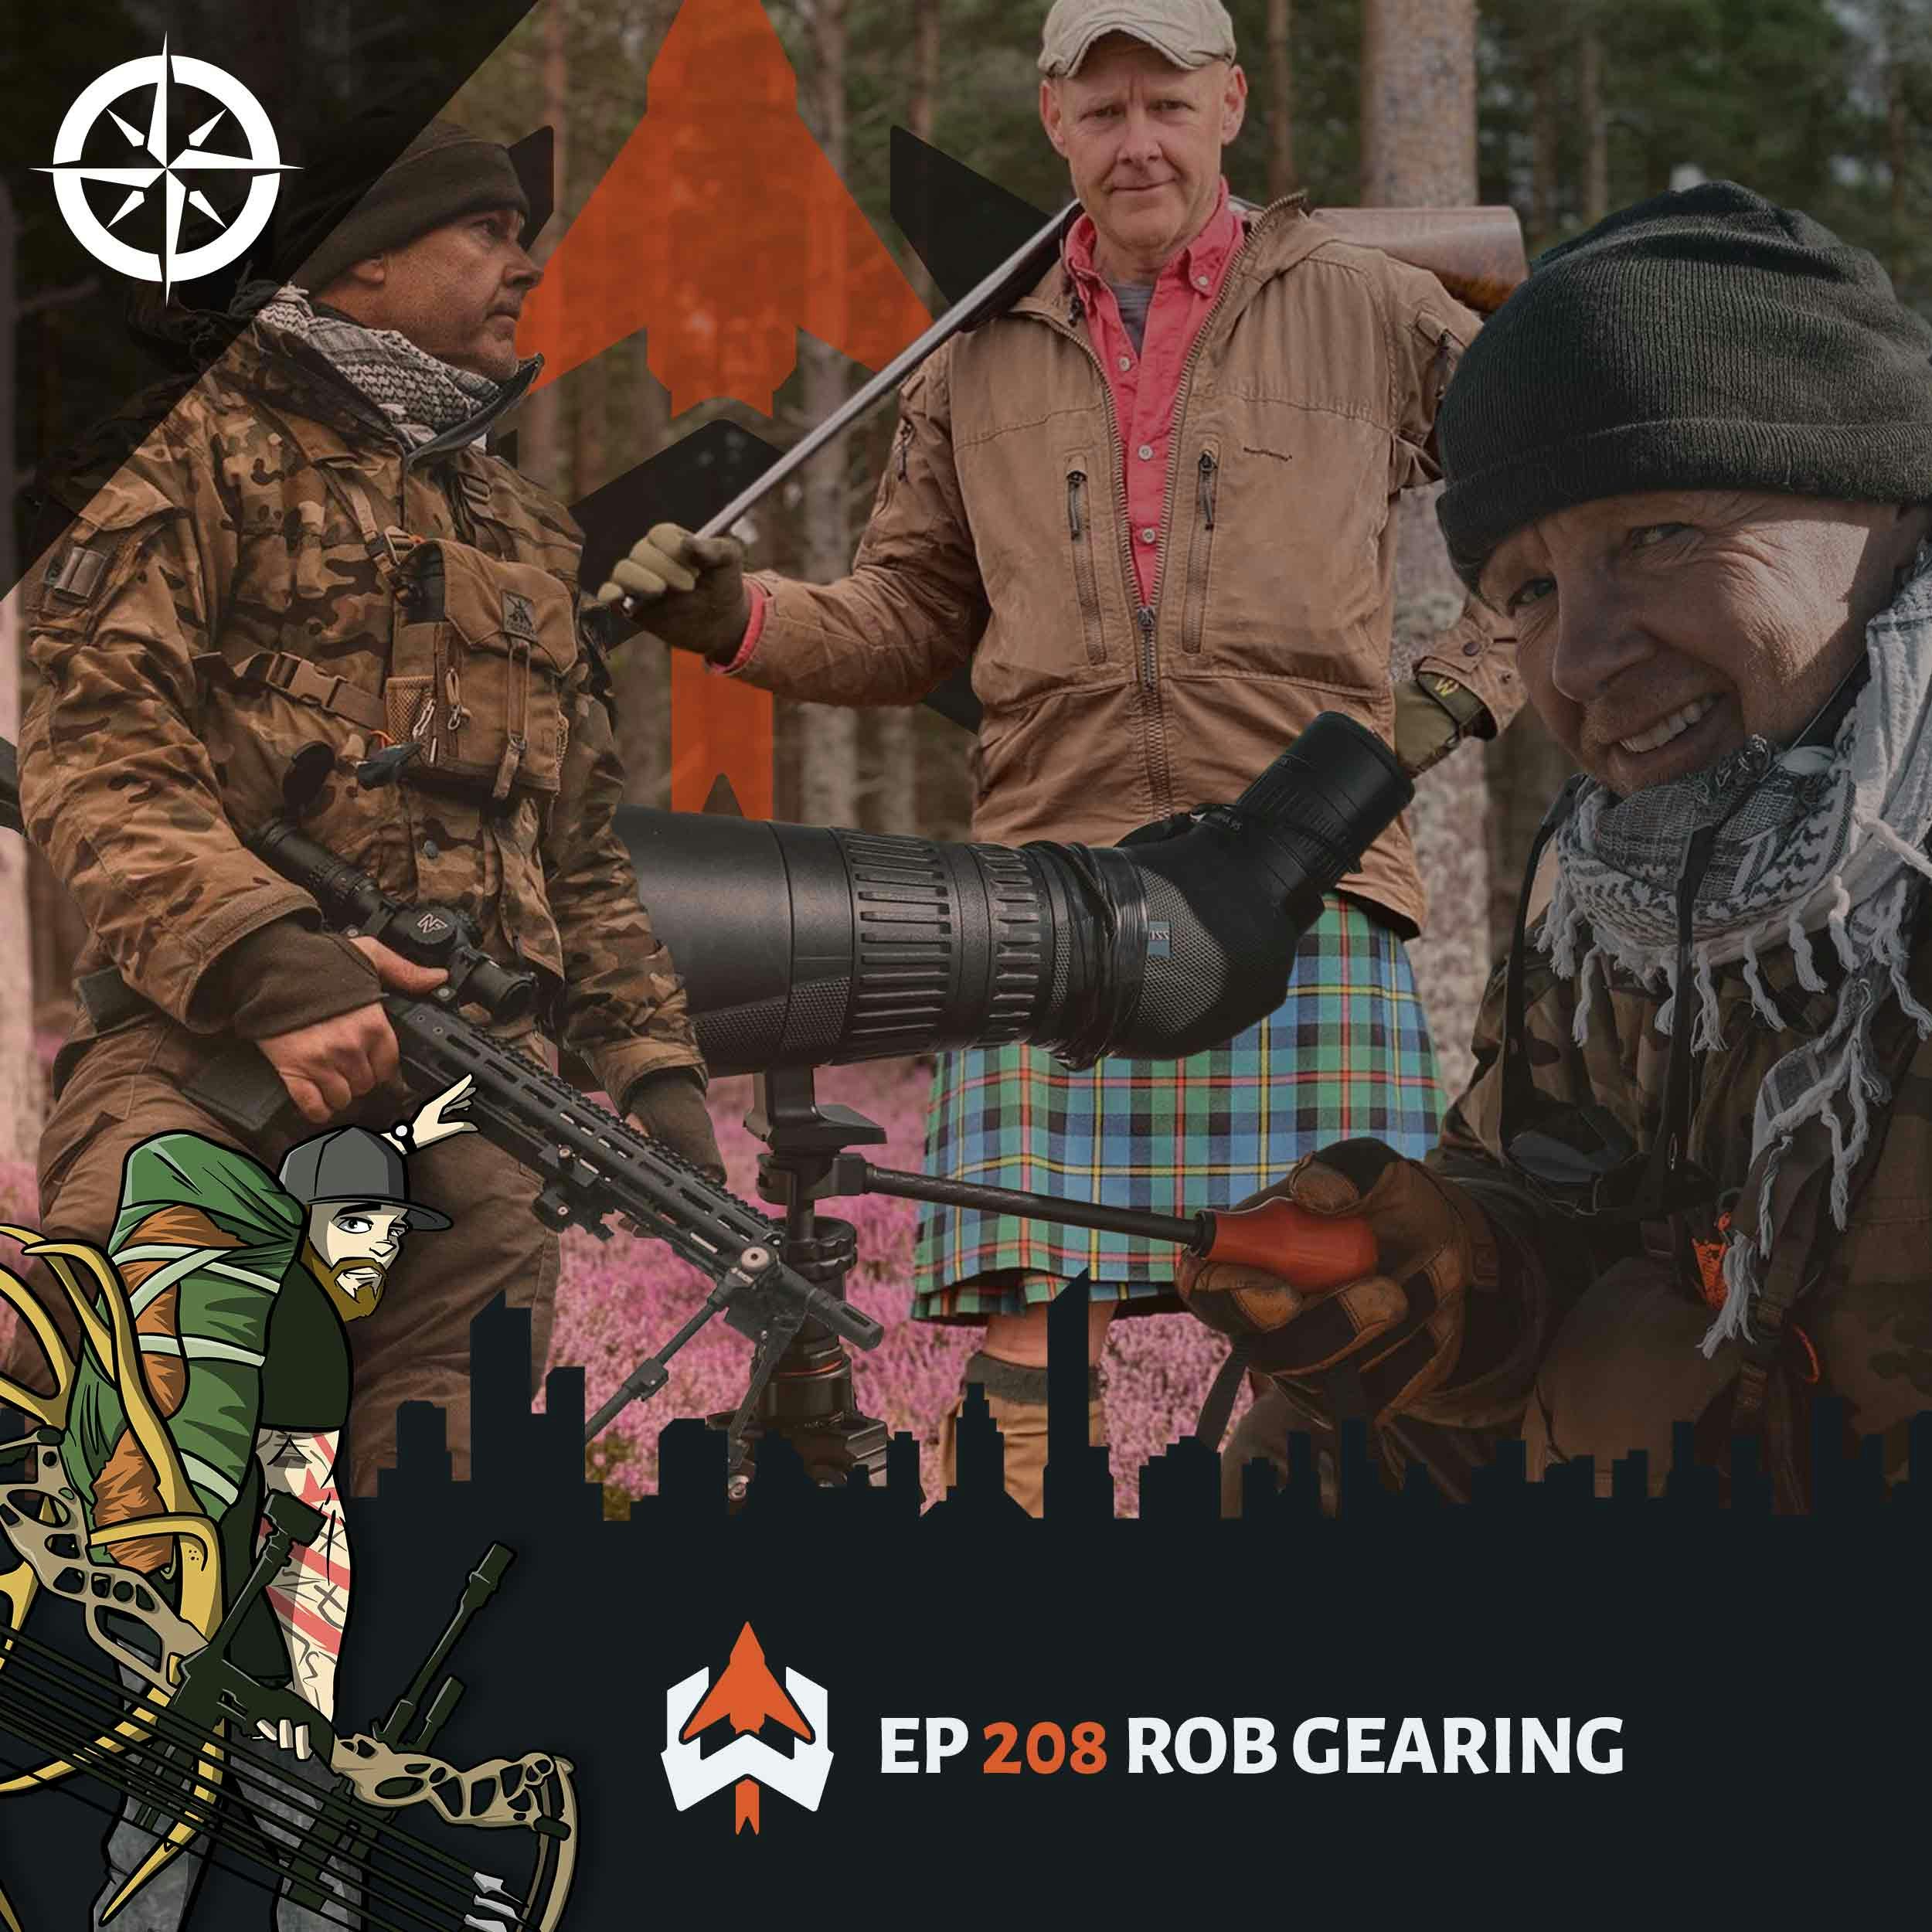 Ep 208 - Rob Gearing: Our Common Thread of Hunting